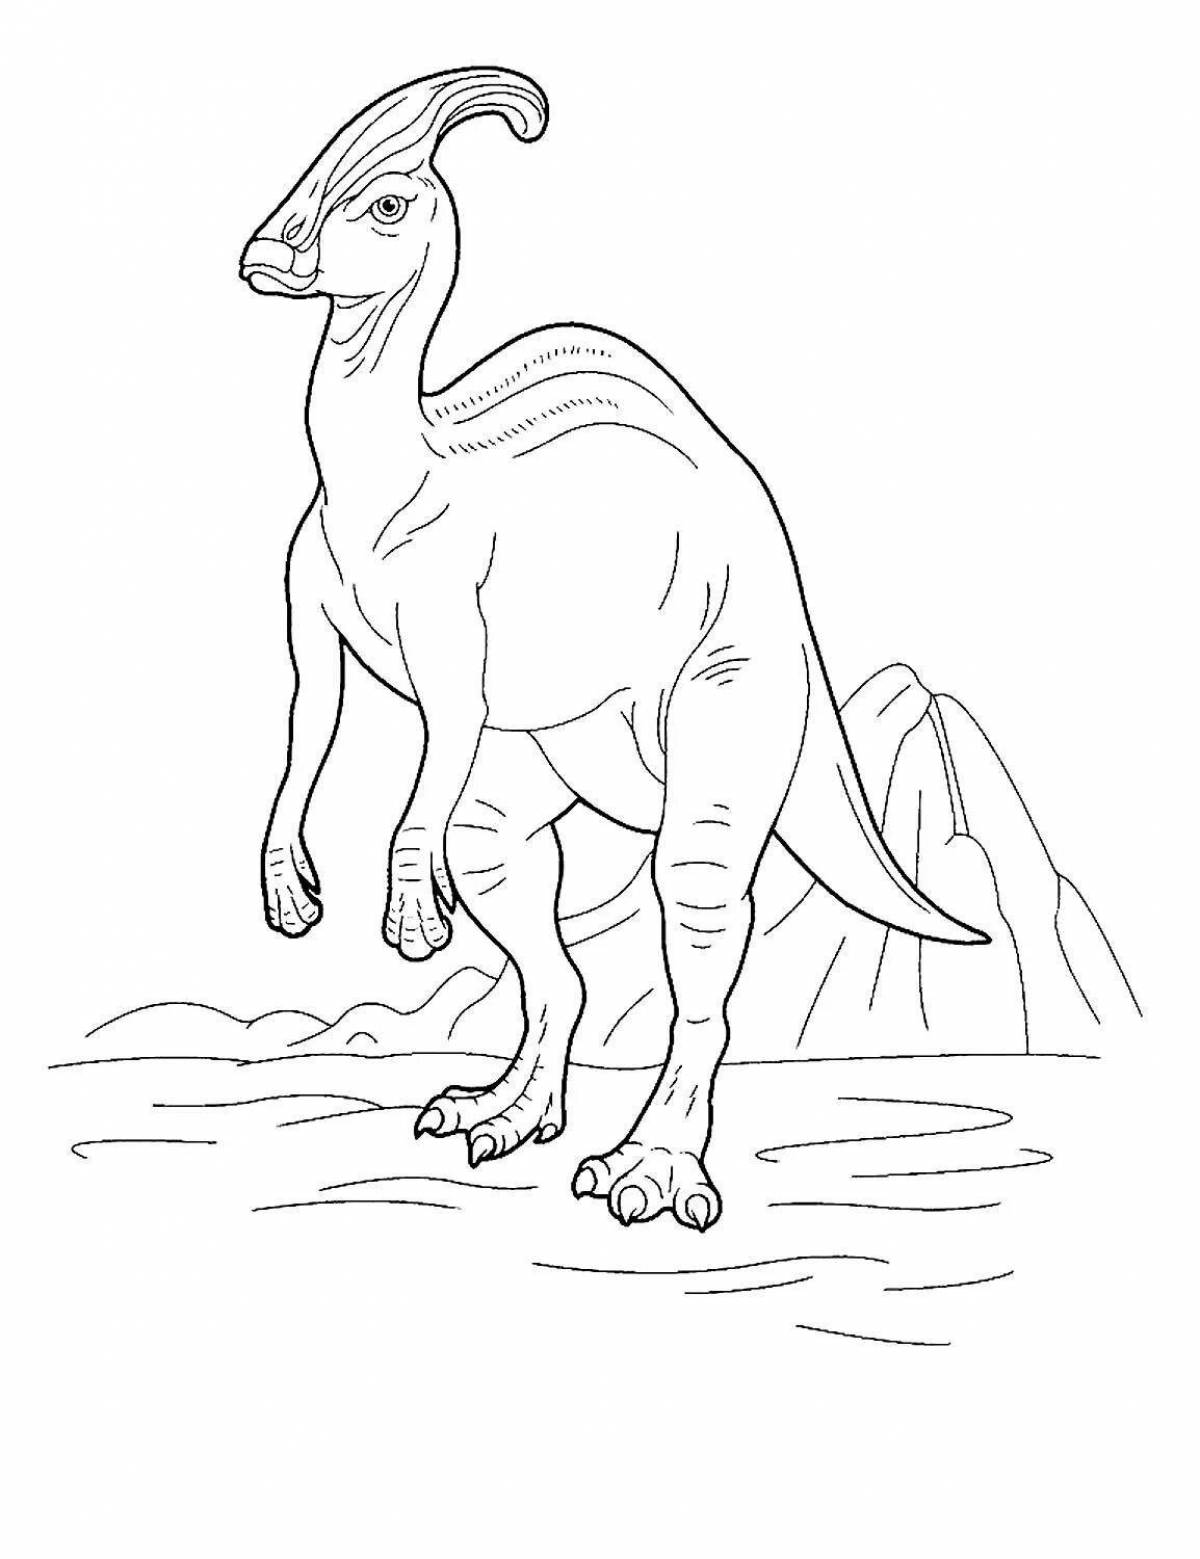 Parasaurolophus in balance coloring page